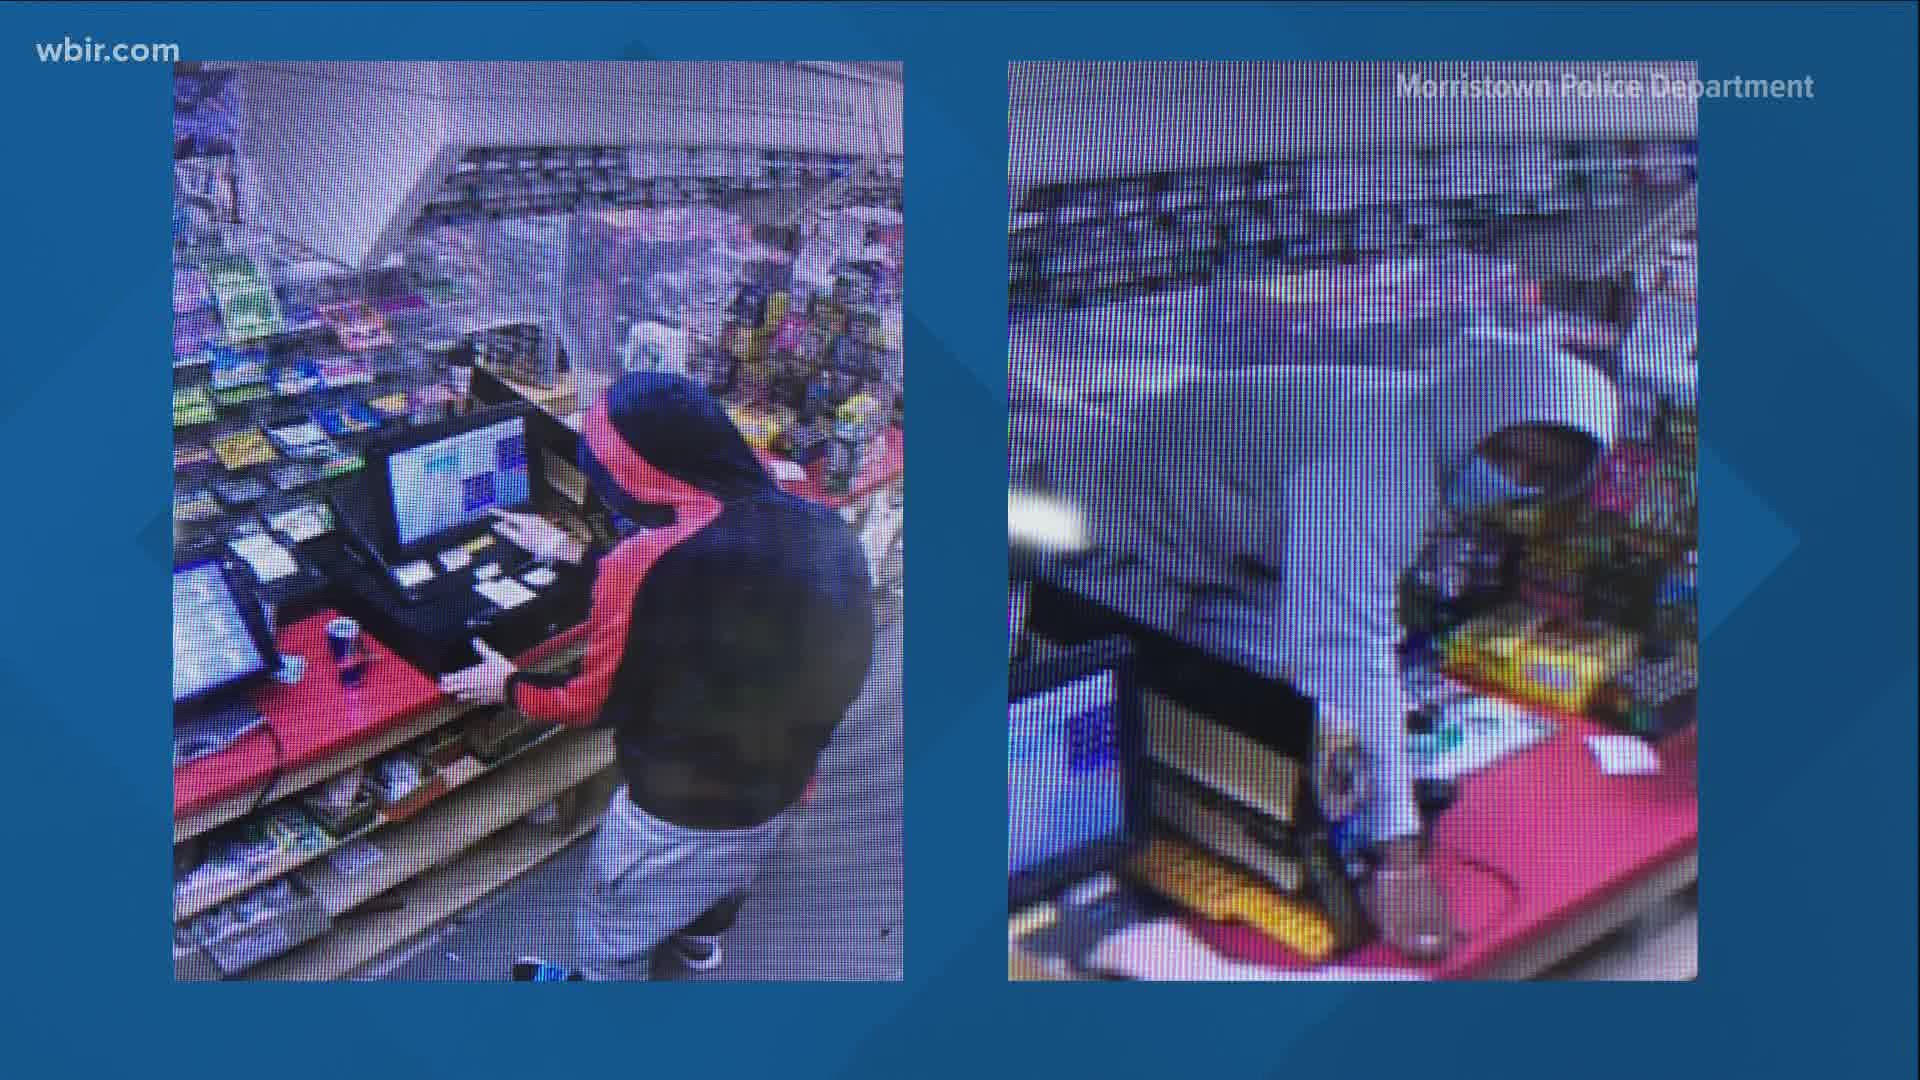 When the clerk refused to hand over money, investigators say the two men crossed over the counter and punched her and then took off when another customer walked in